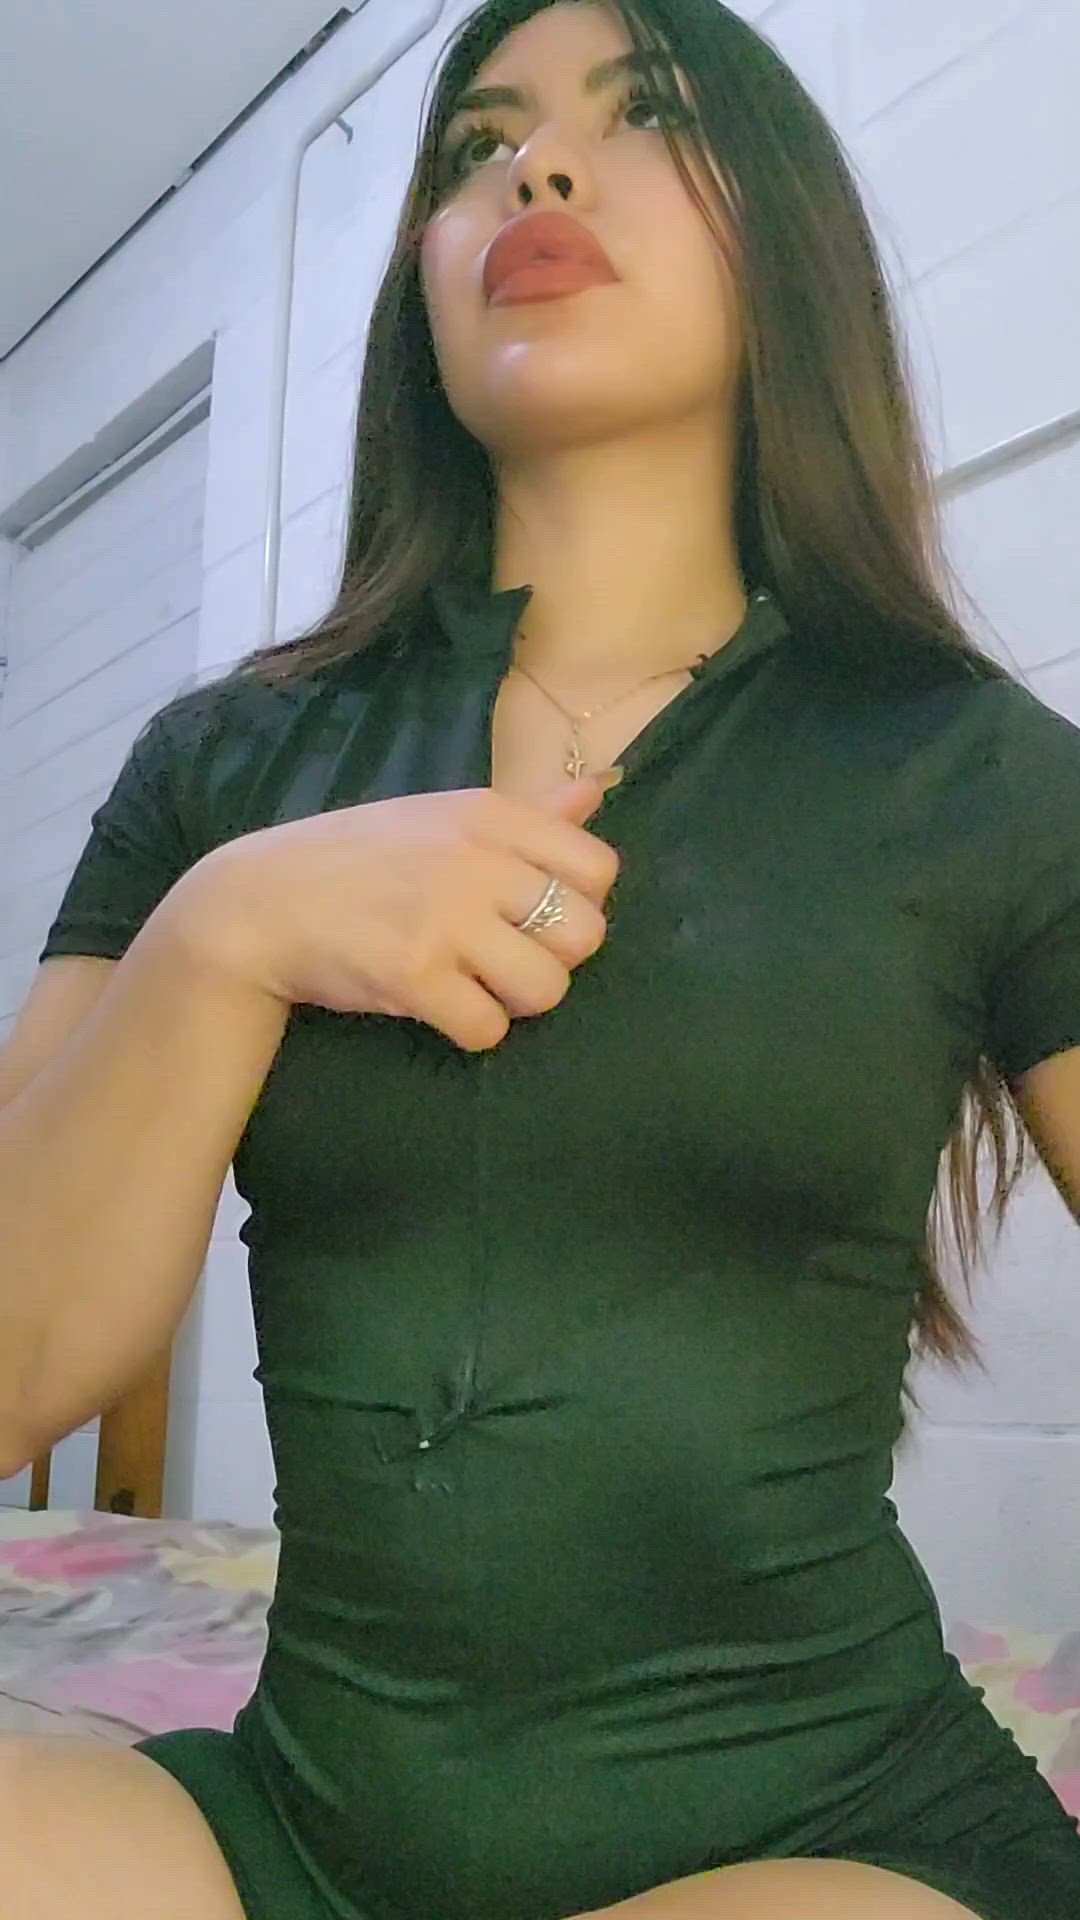 Amateur porn video with onlyfans model miiadiaz <strong>@mia_diaz04</strong>